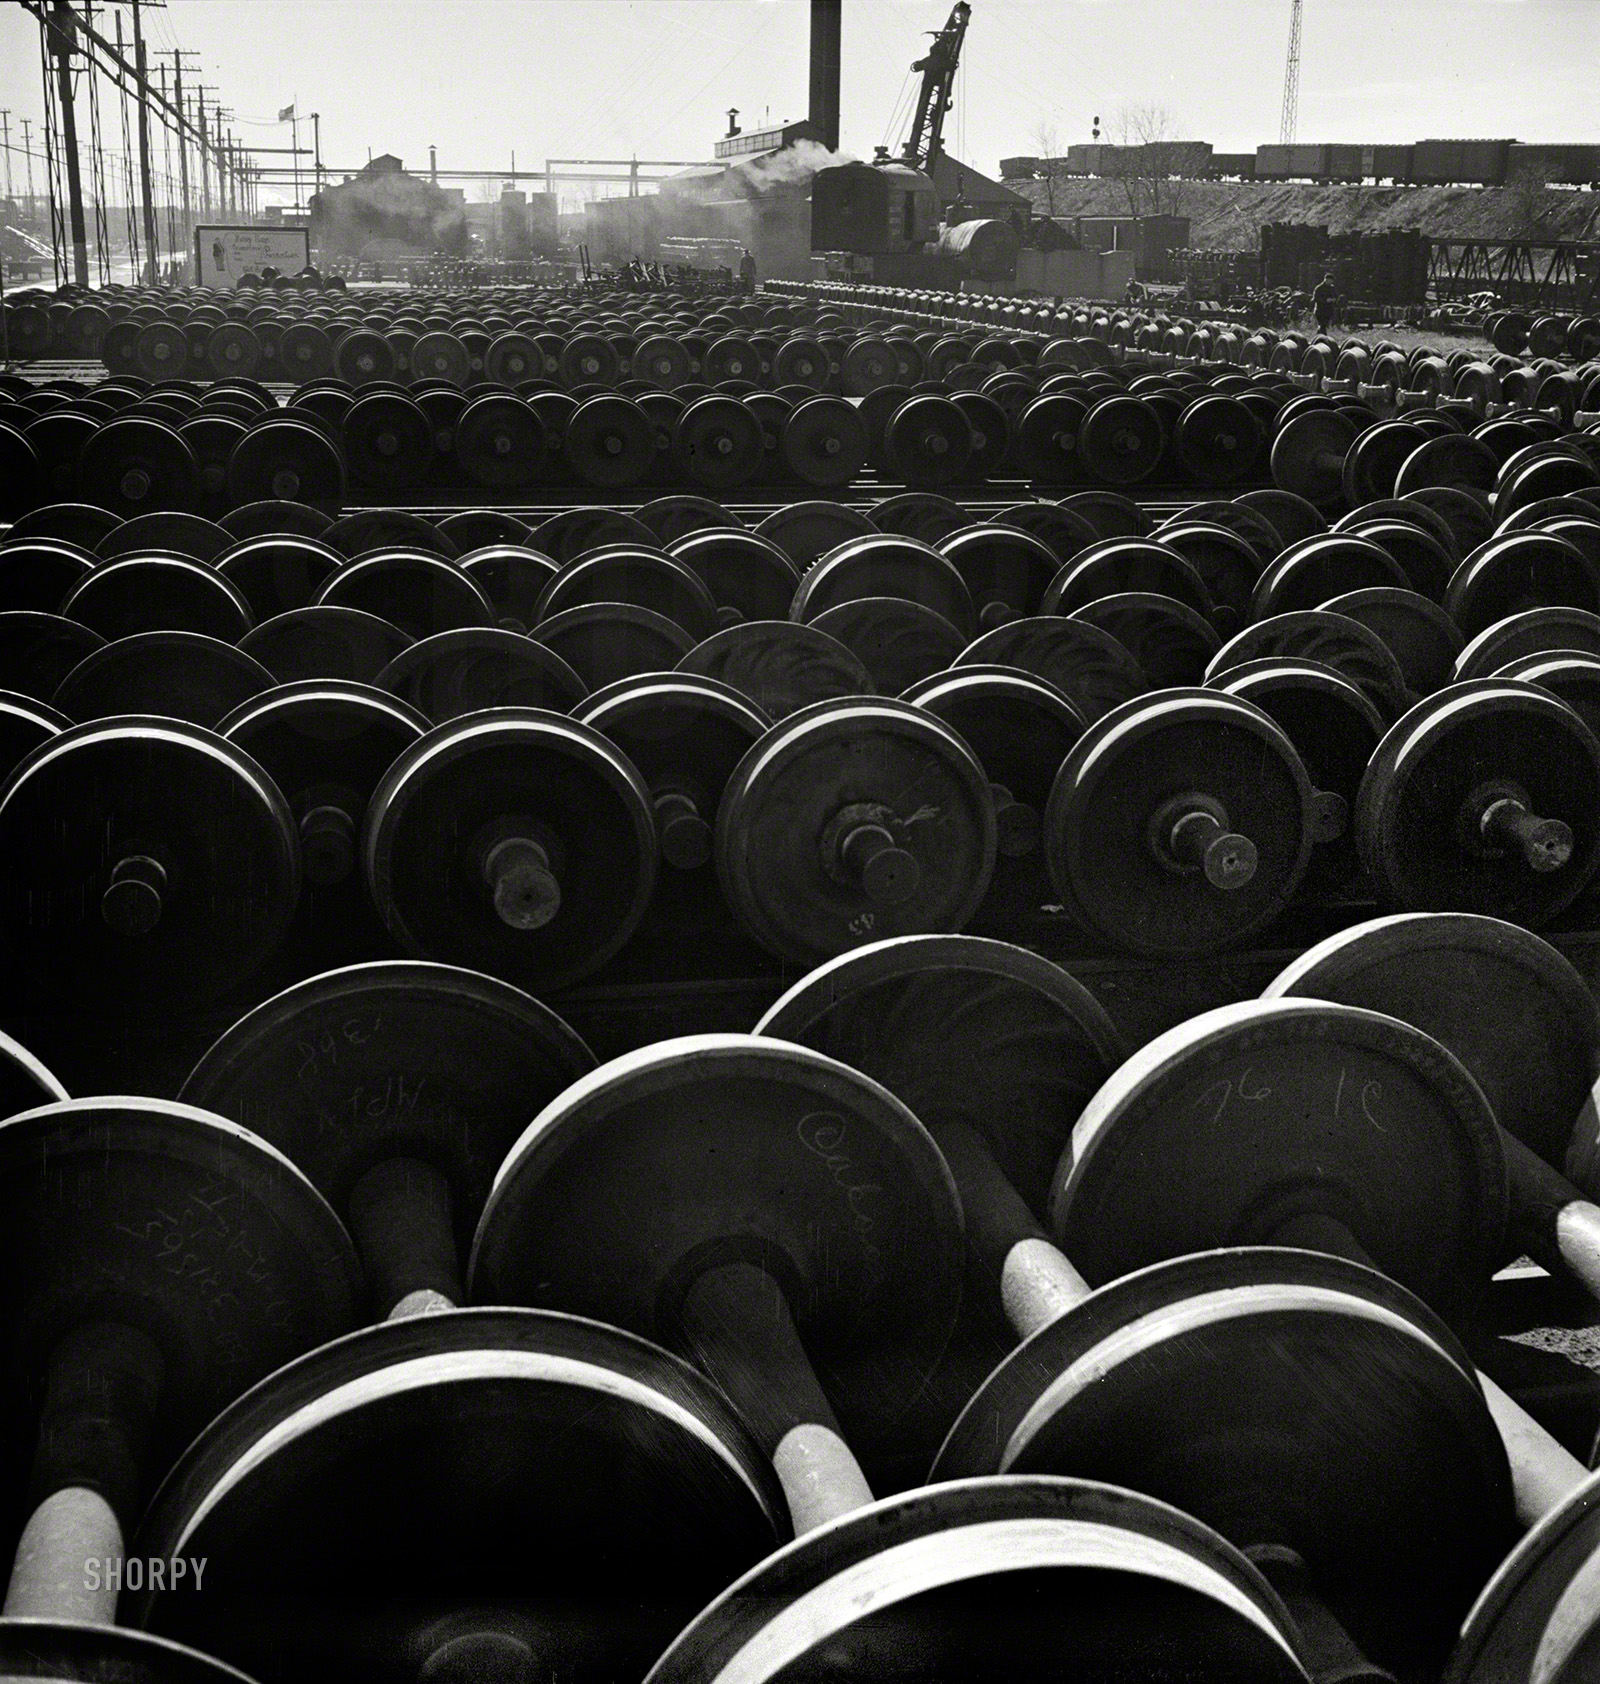 November 1942. Chicago. "Wheels and axles outside the locomotive shops at an Illinois Central Railroad yard." Medium-format nitrate negative by Jack Delano for the Office of War Information. View full size.